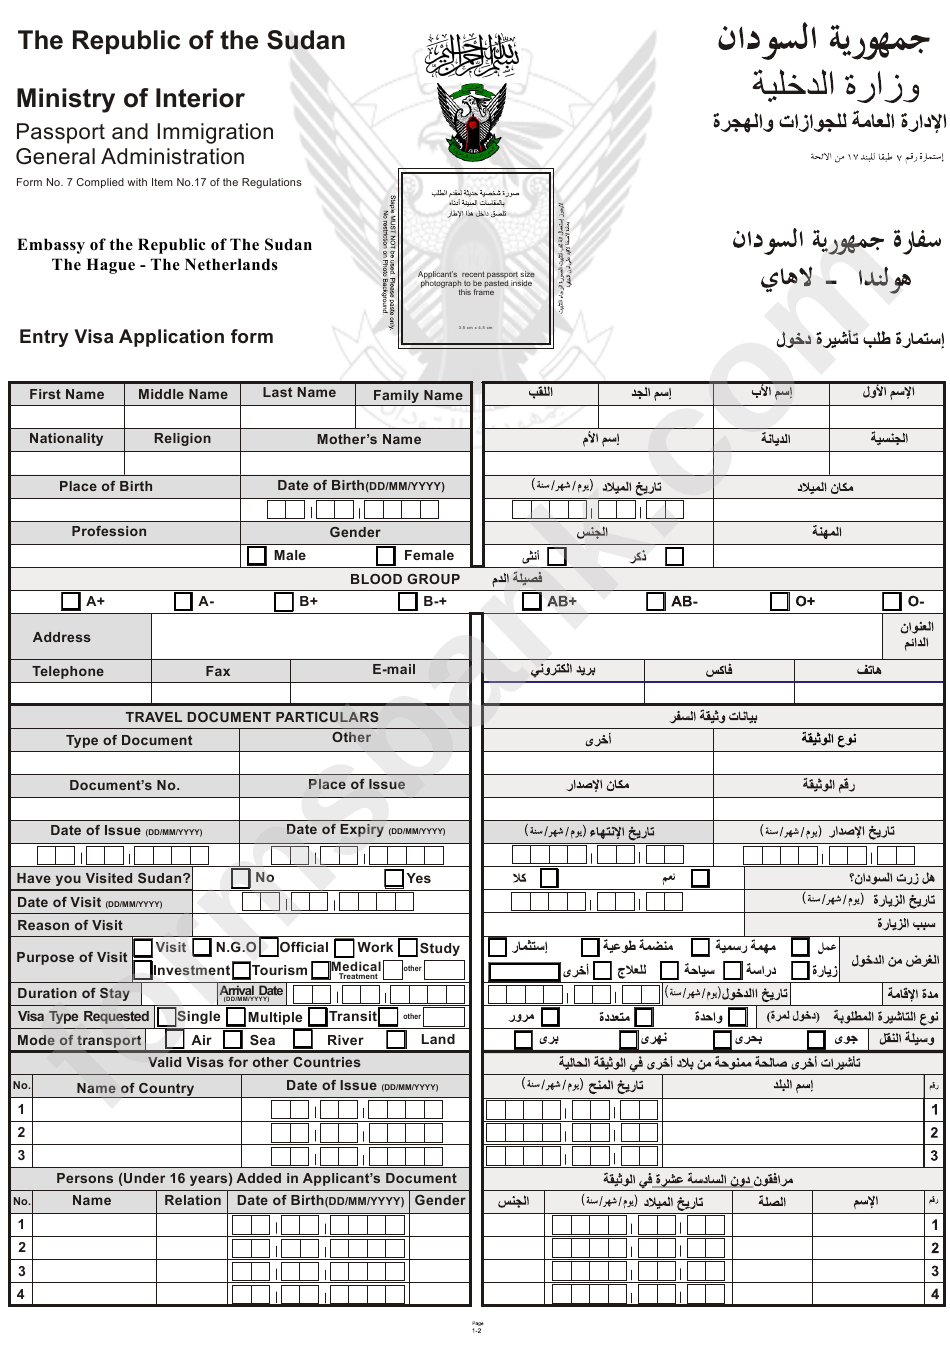 Form 7 - Entry Visa Application Form - The Republic Of The Sudan